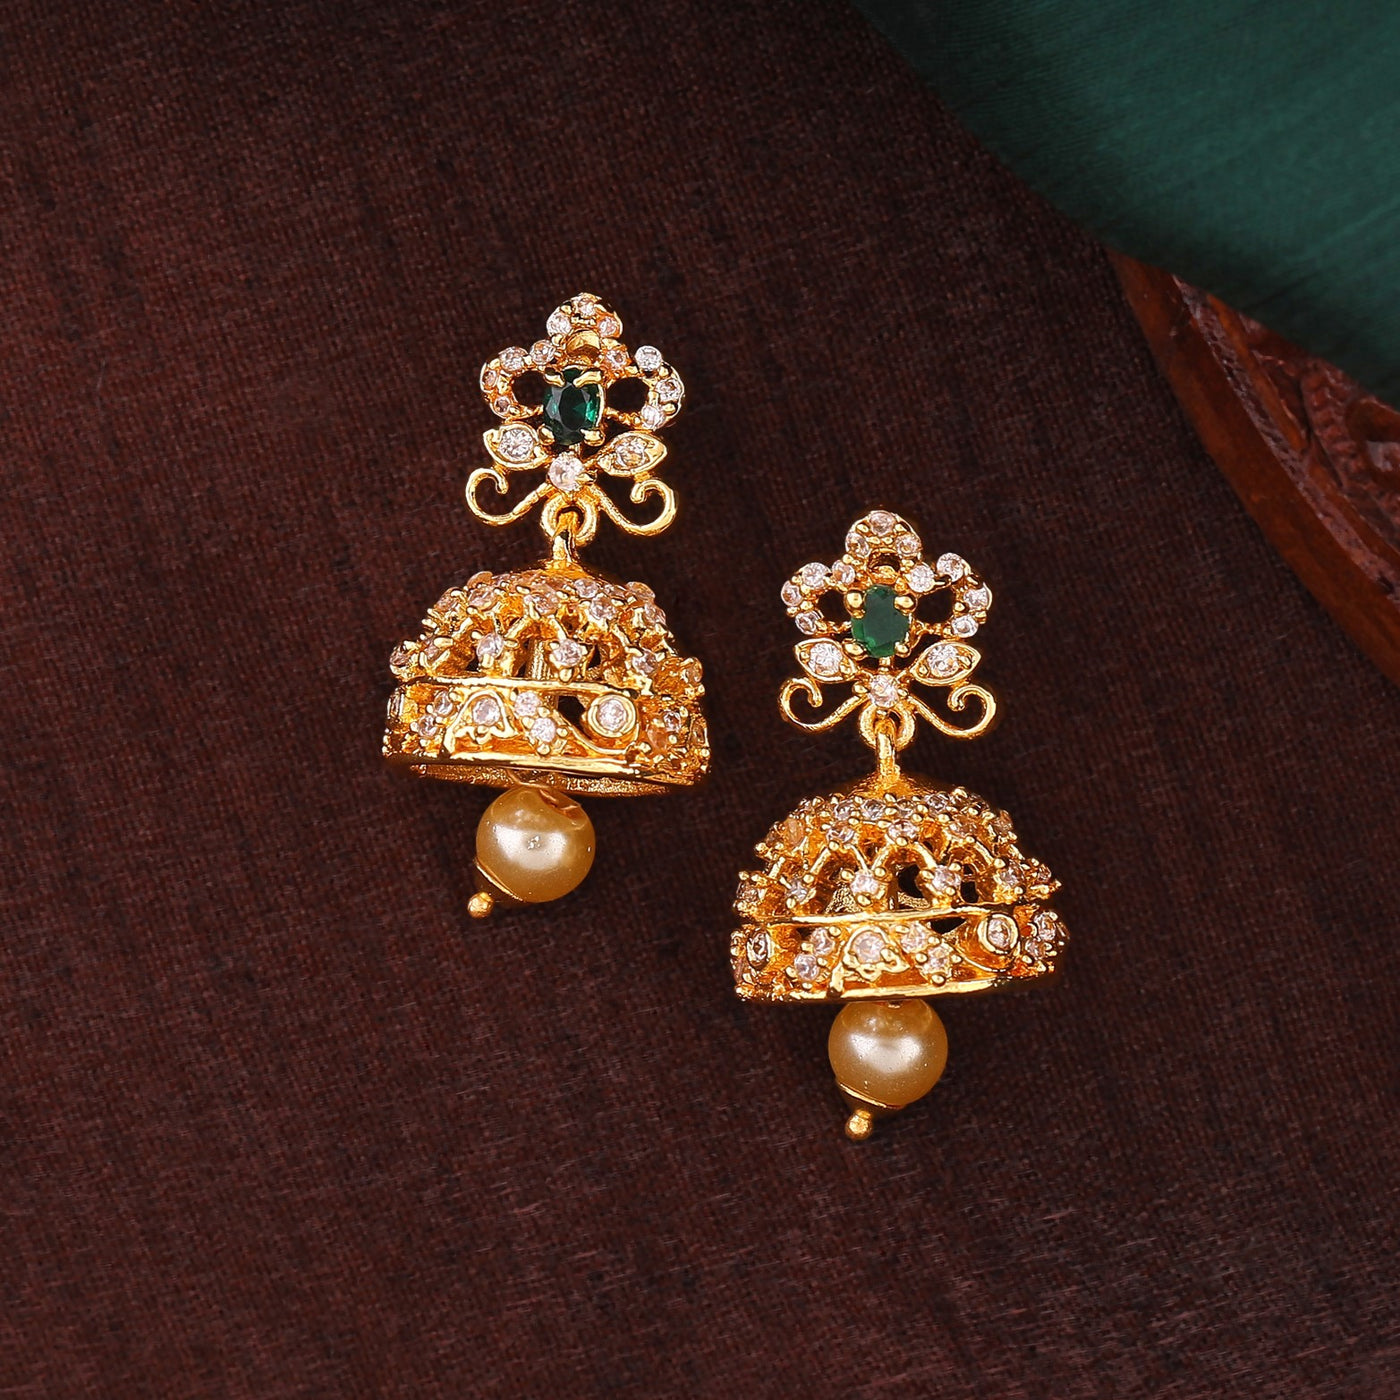 Estele Gold Plated CZ Beautiful Jhumki Earrings with Pearls & Green Crystals for Women